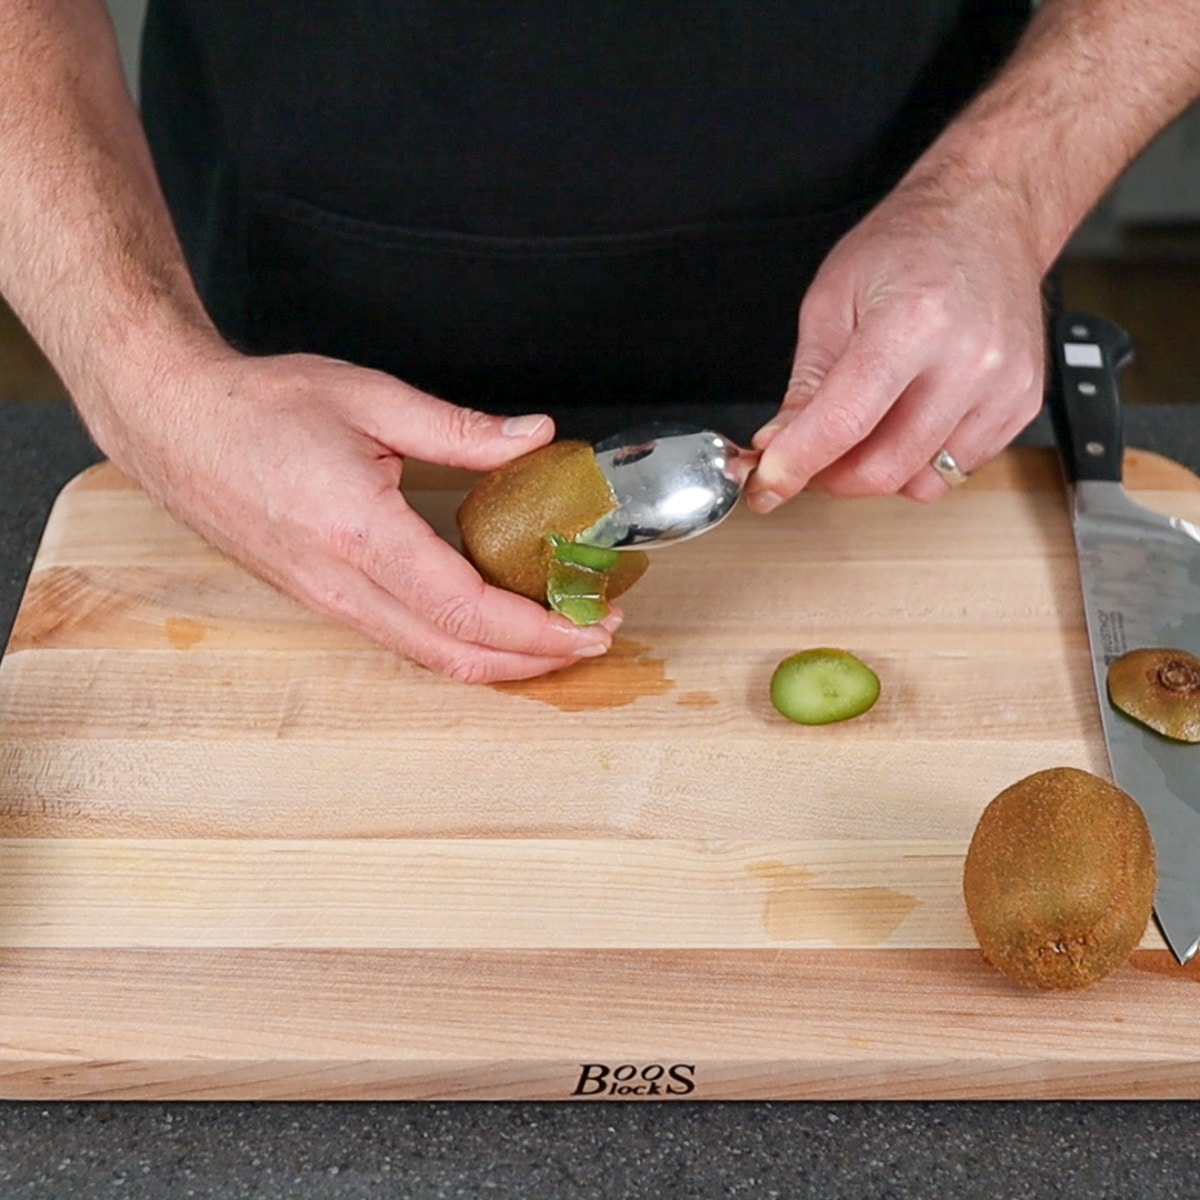 kiwi fruit being peeled with a spoon
